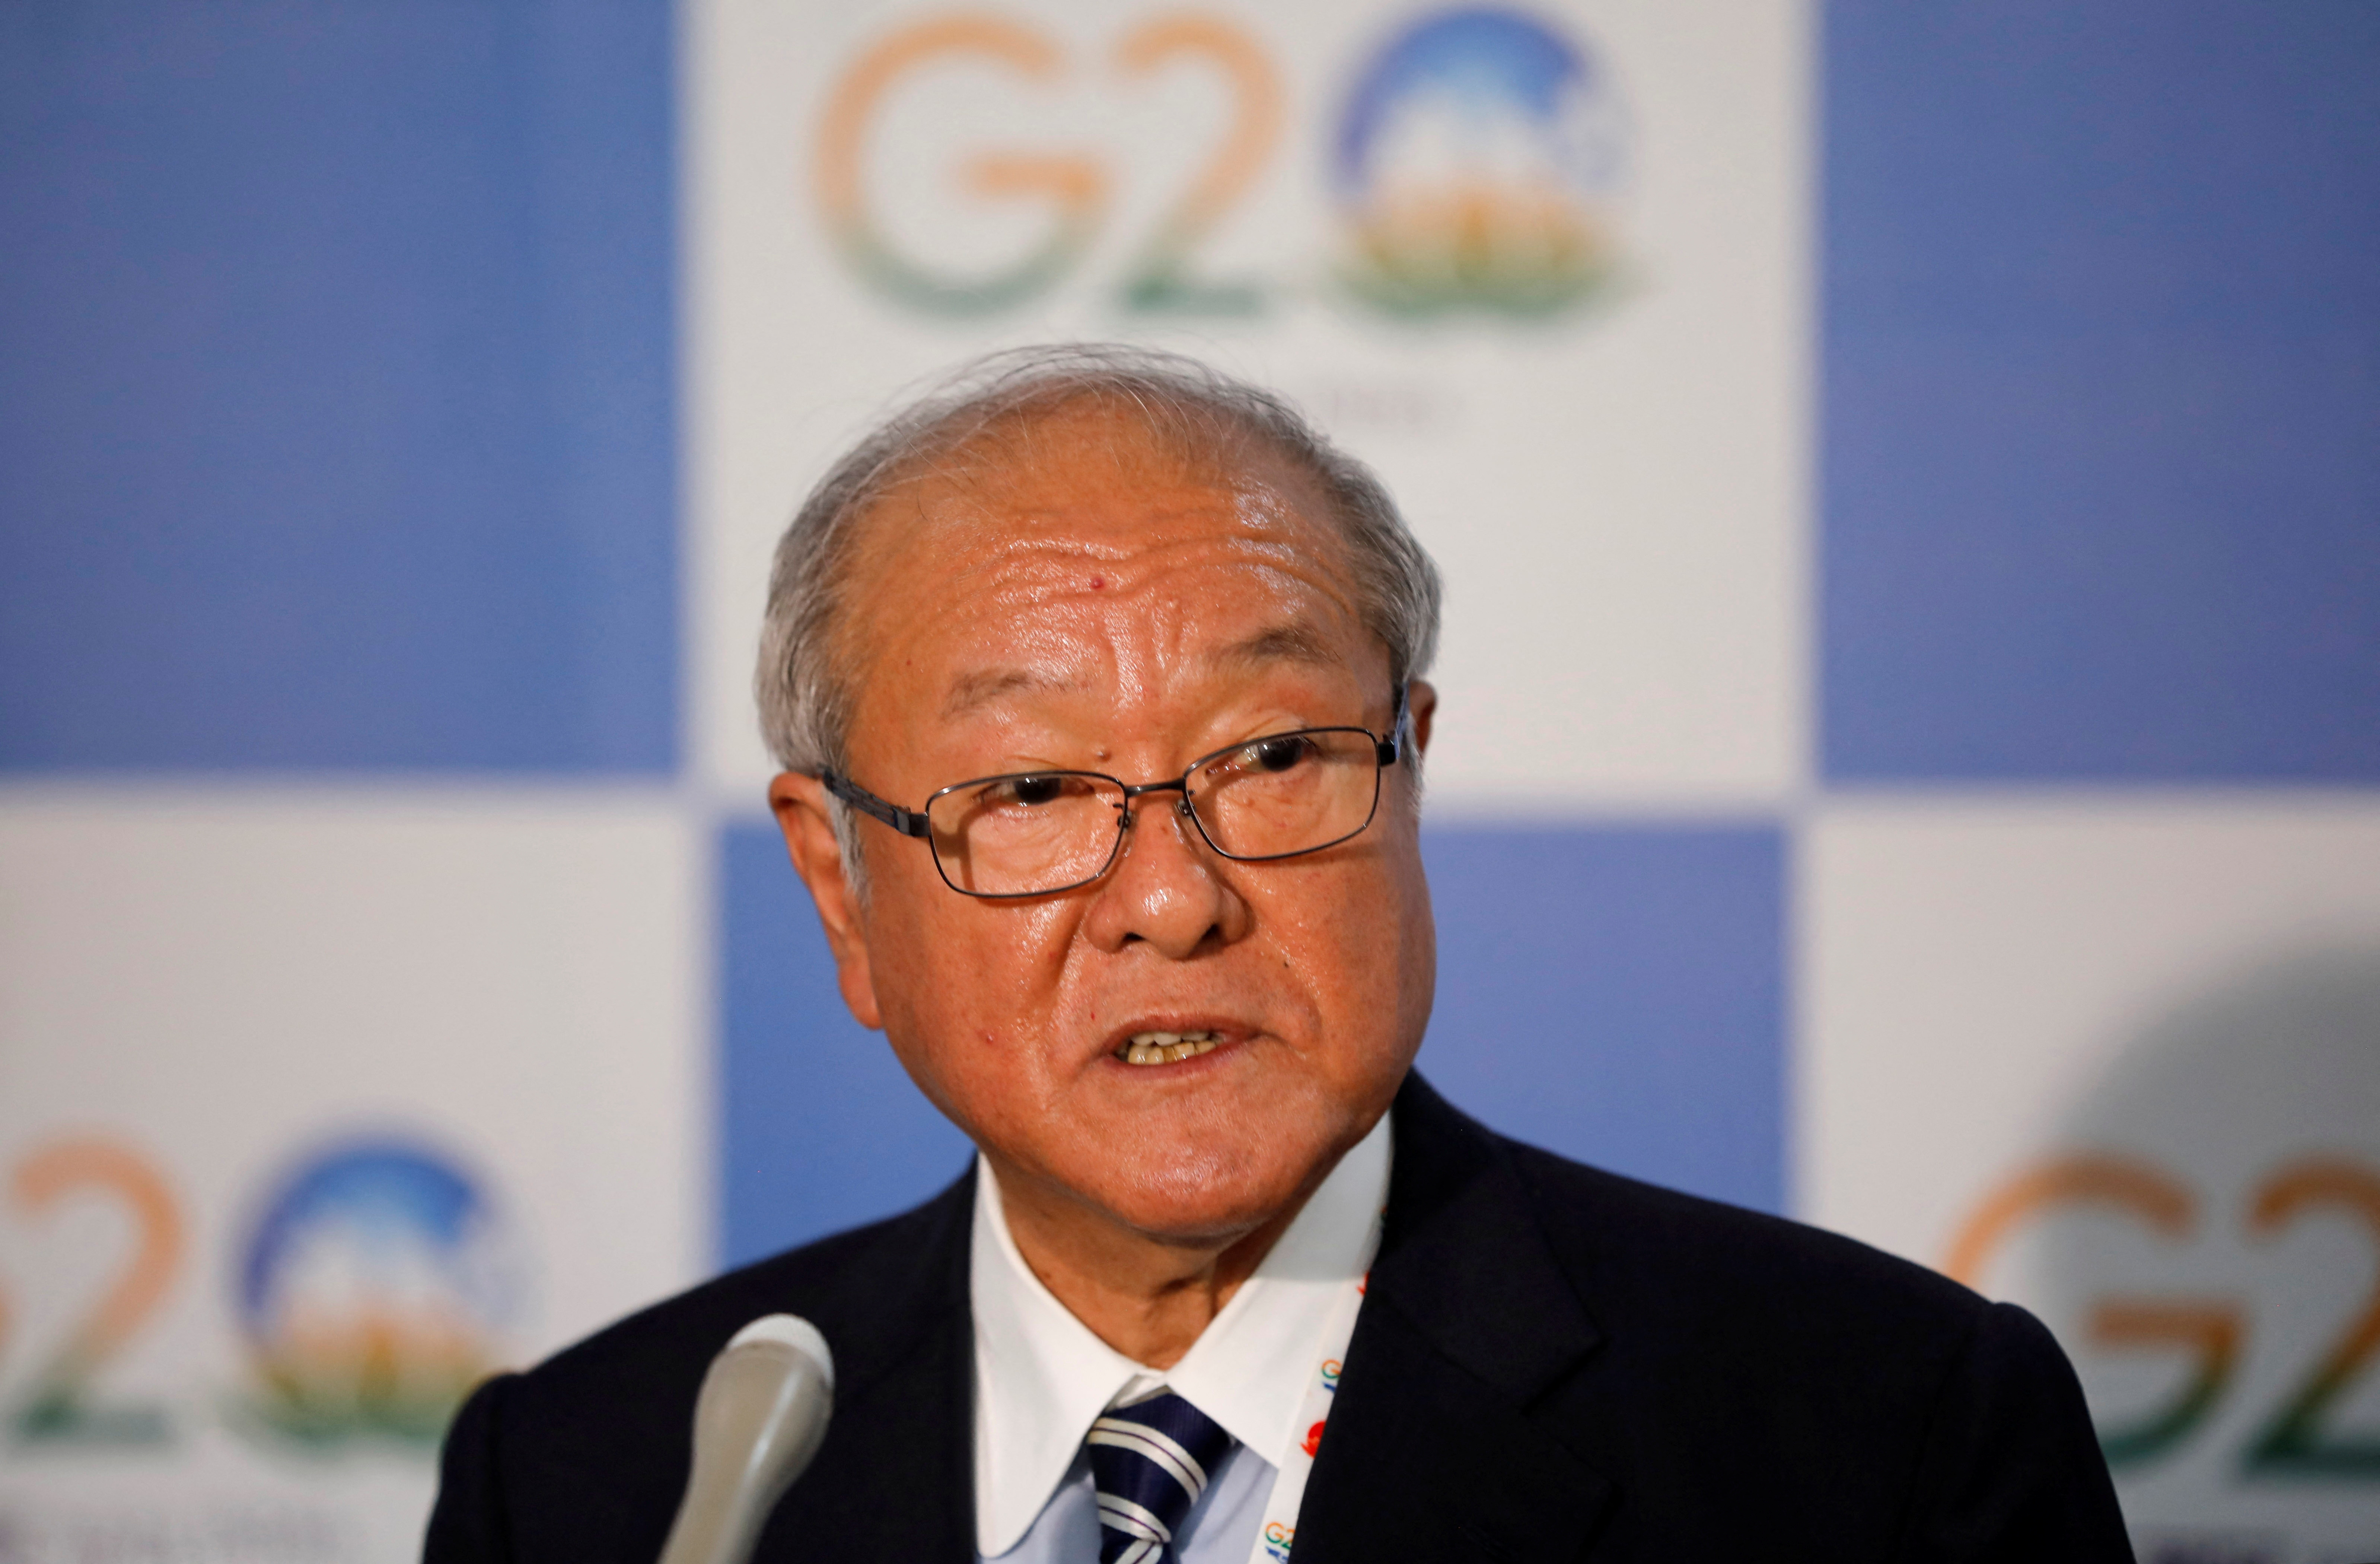 Japanese Finance Minister Shunichi Suzuki speaks with the media after a meeting of G7 leaders, at Gandhinagar